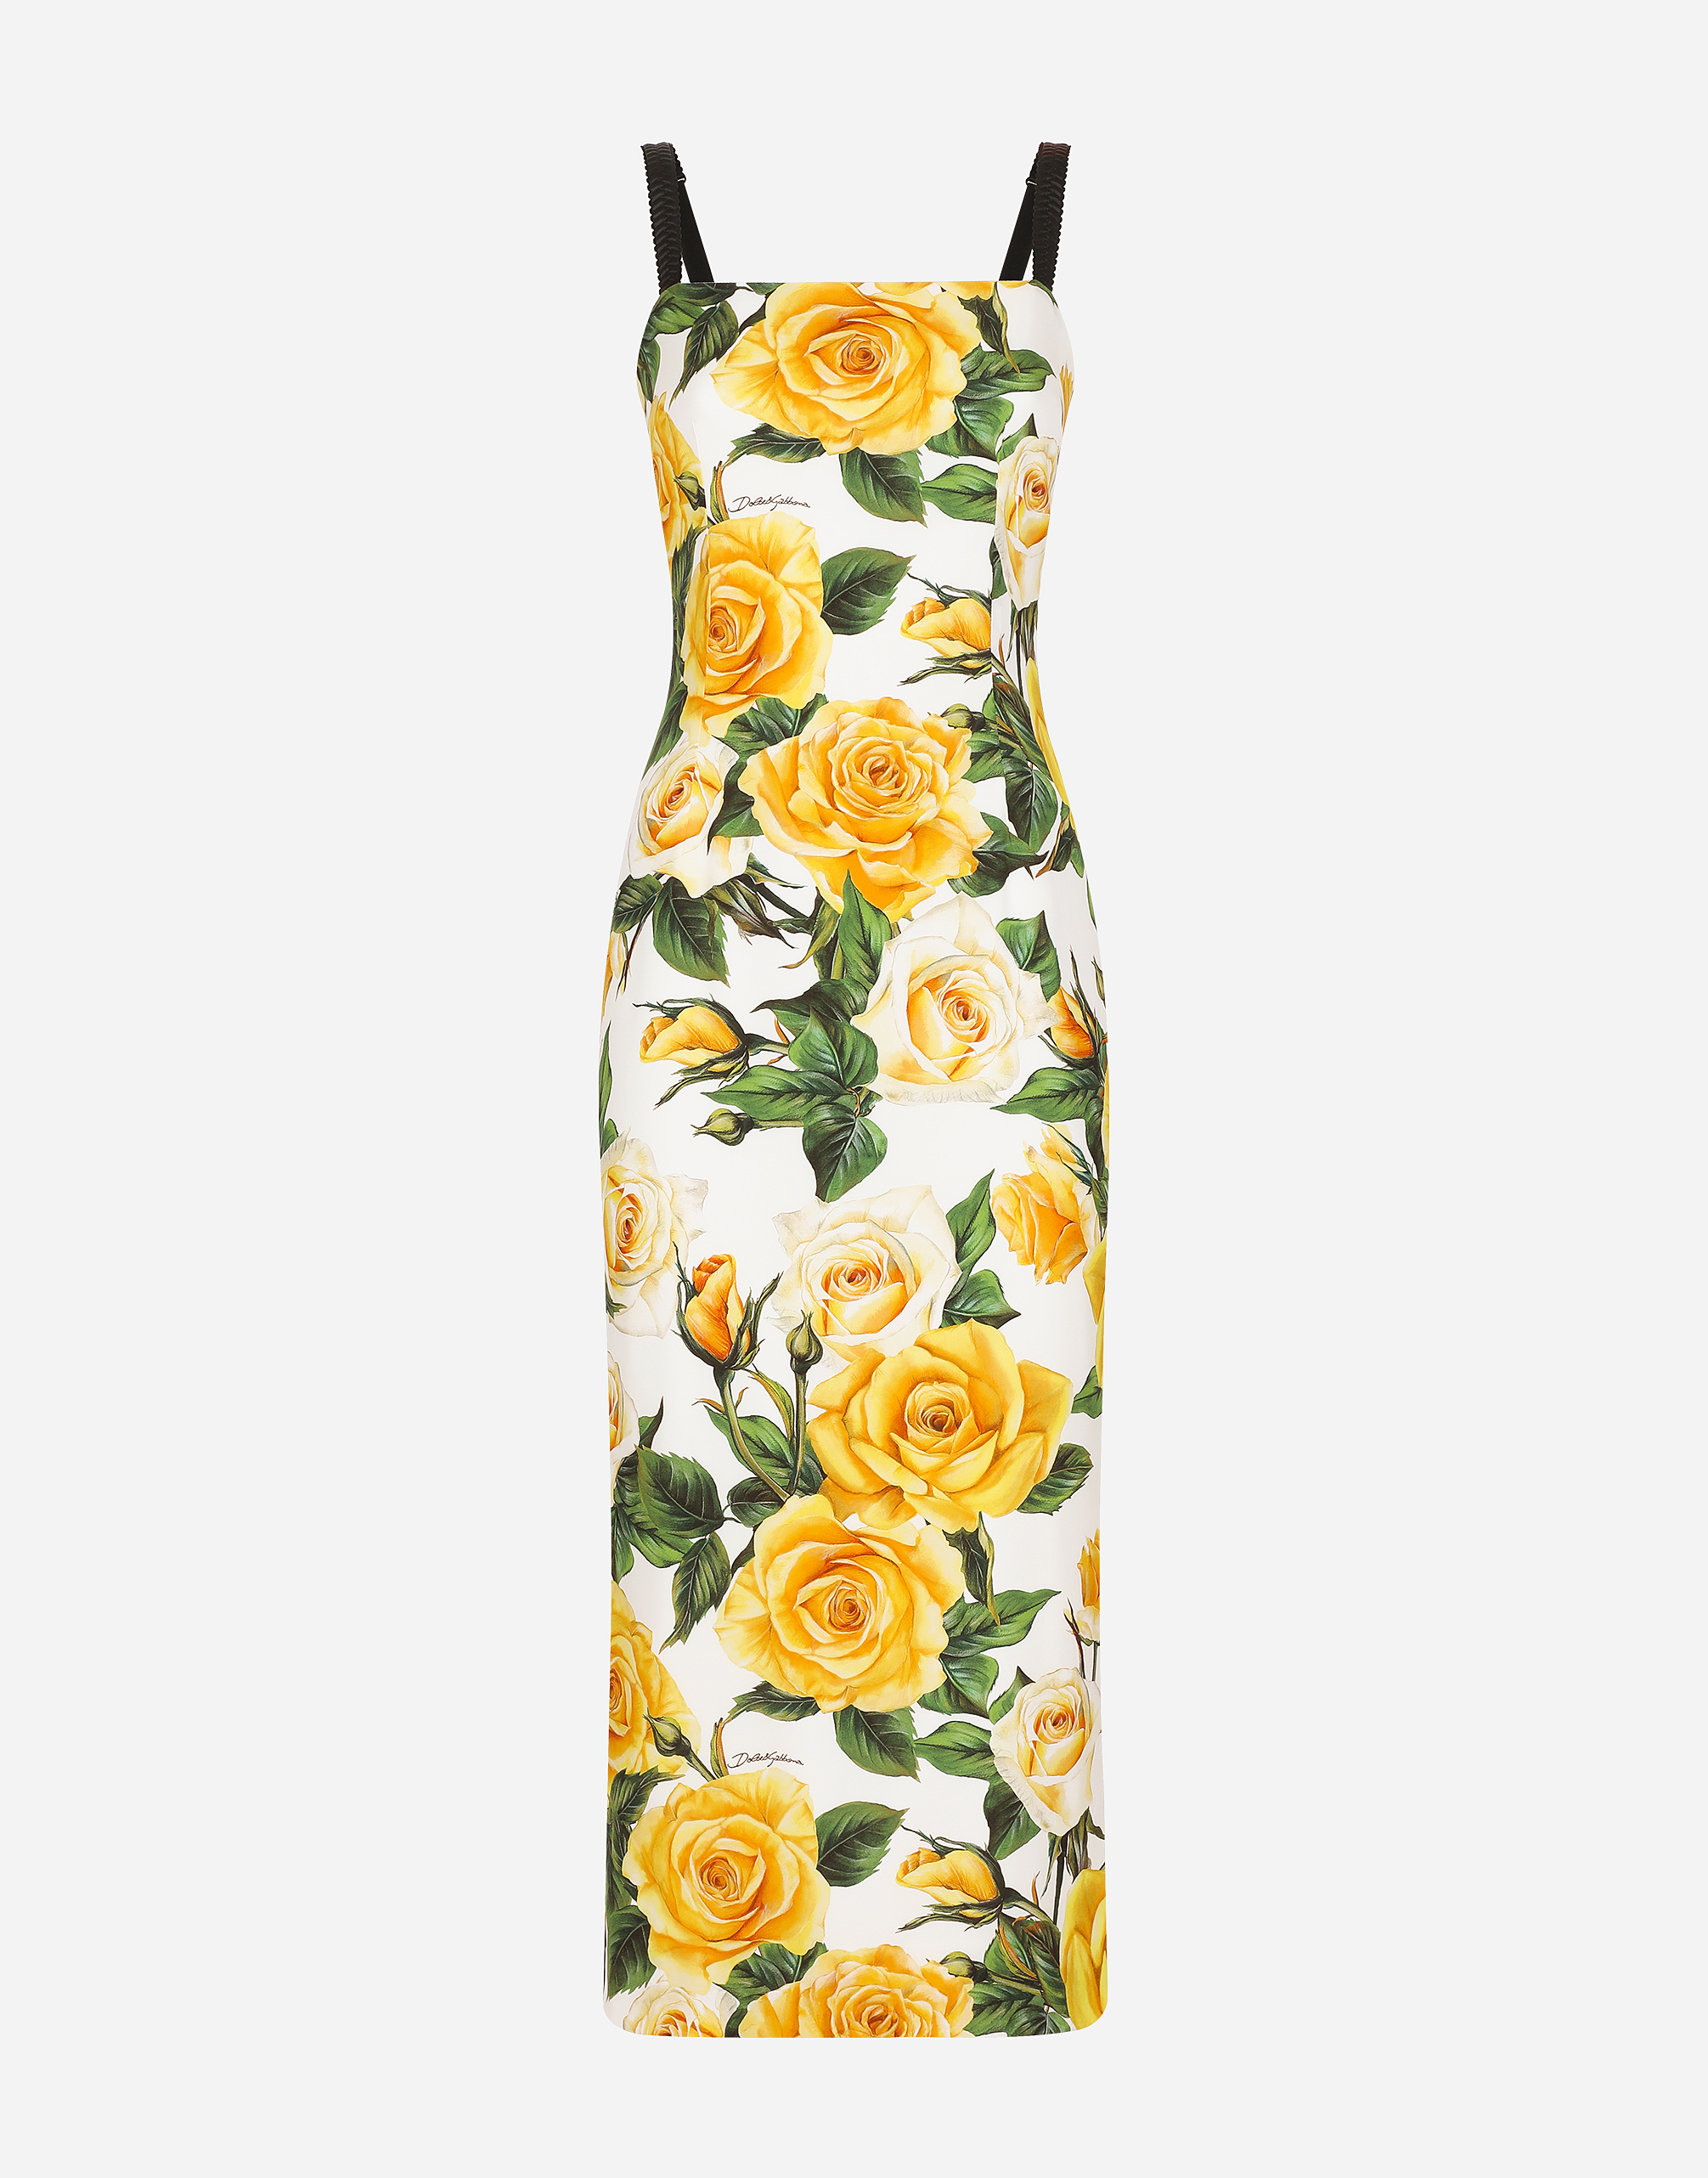 Draped charmeuse dress with yellow rose print